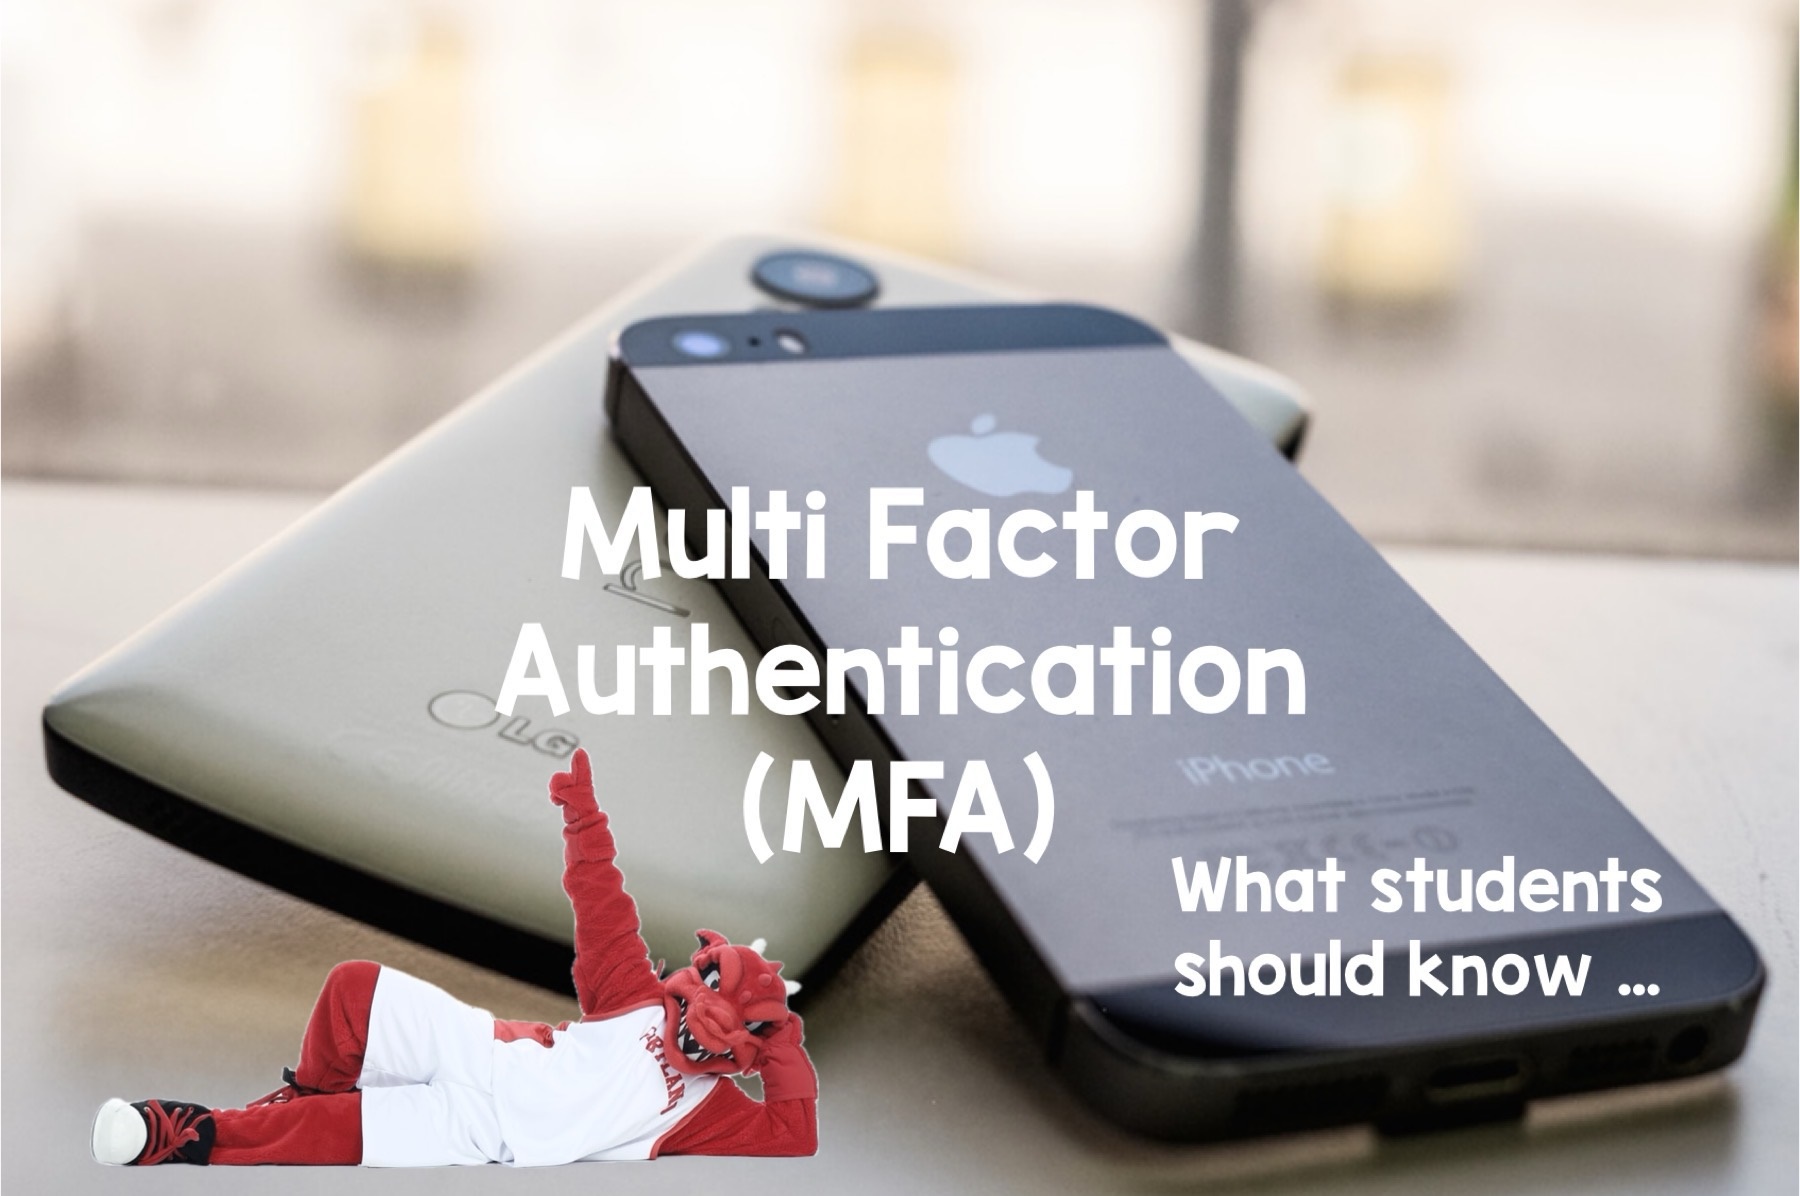 Image advertising the Library's Helpful Tips post about Multi Factor Authentication and students.